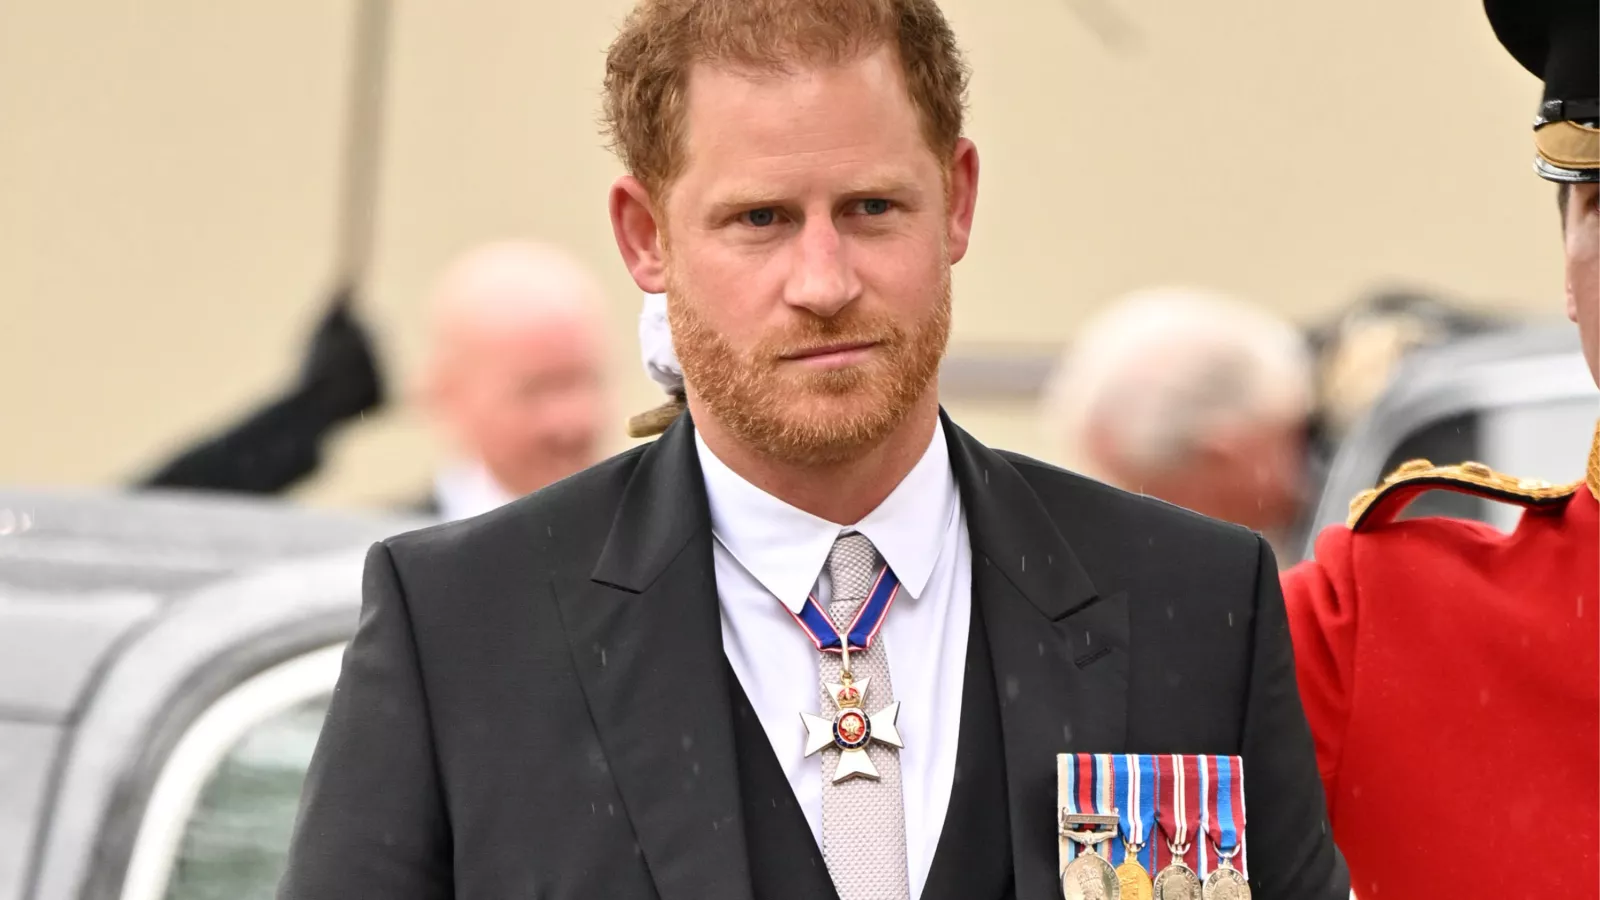 Prince Harry missing father's medal raises eyebrows